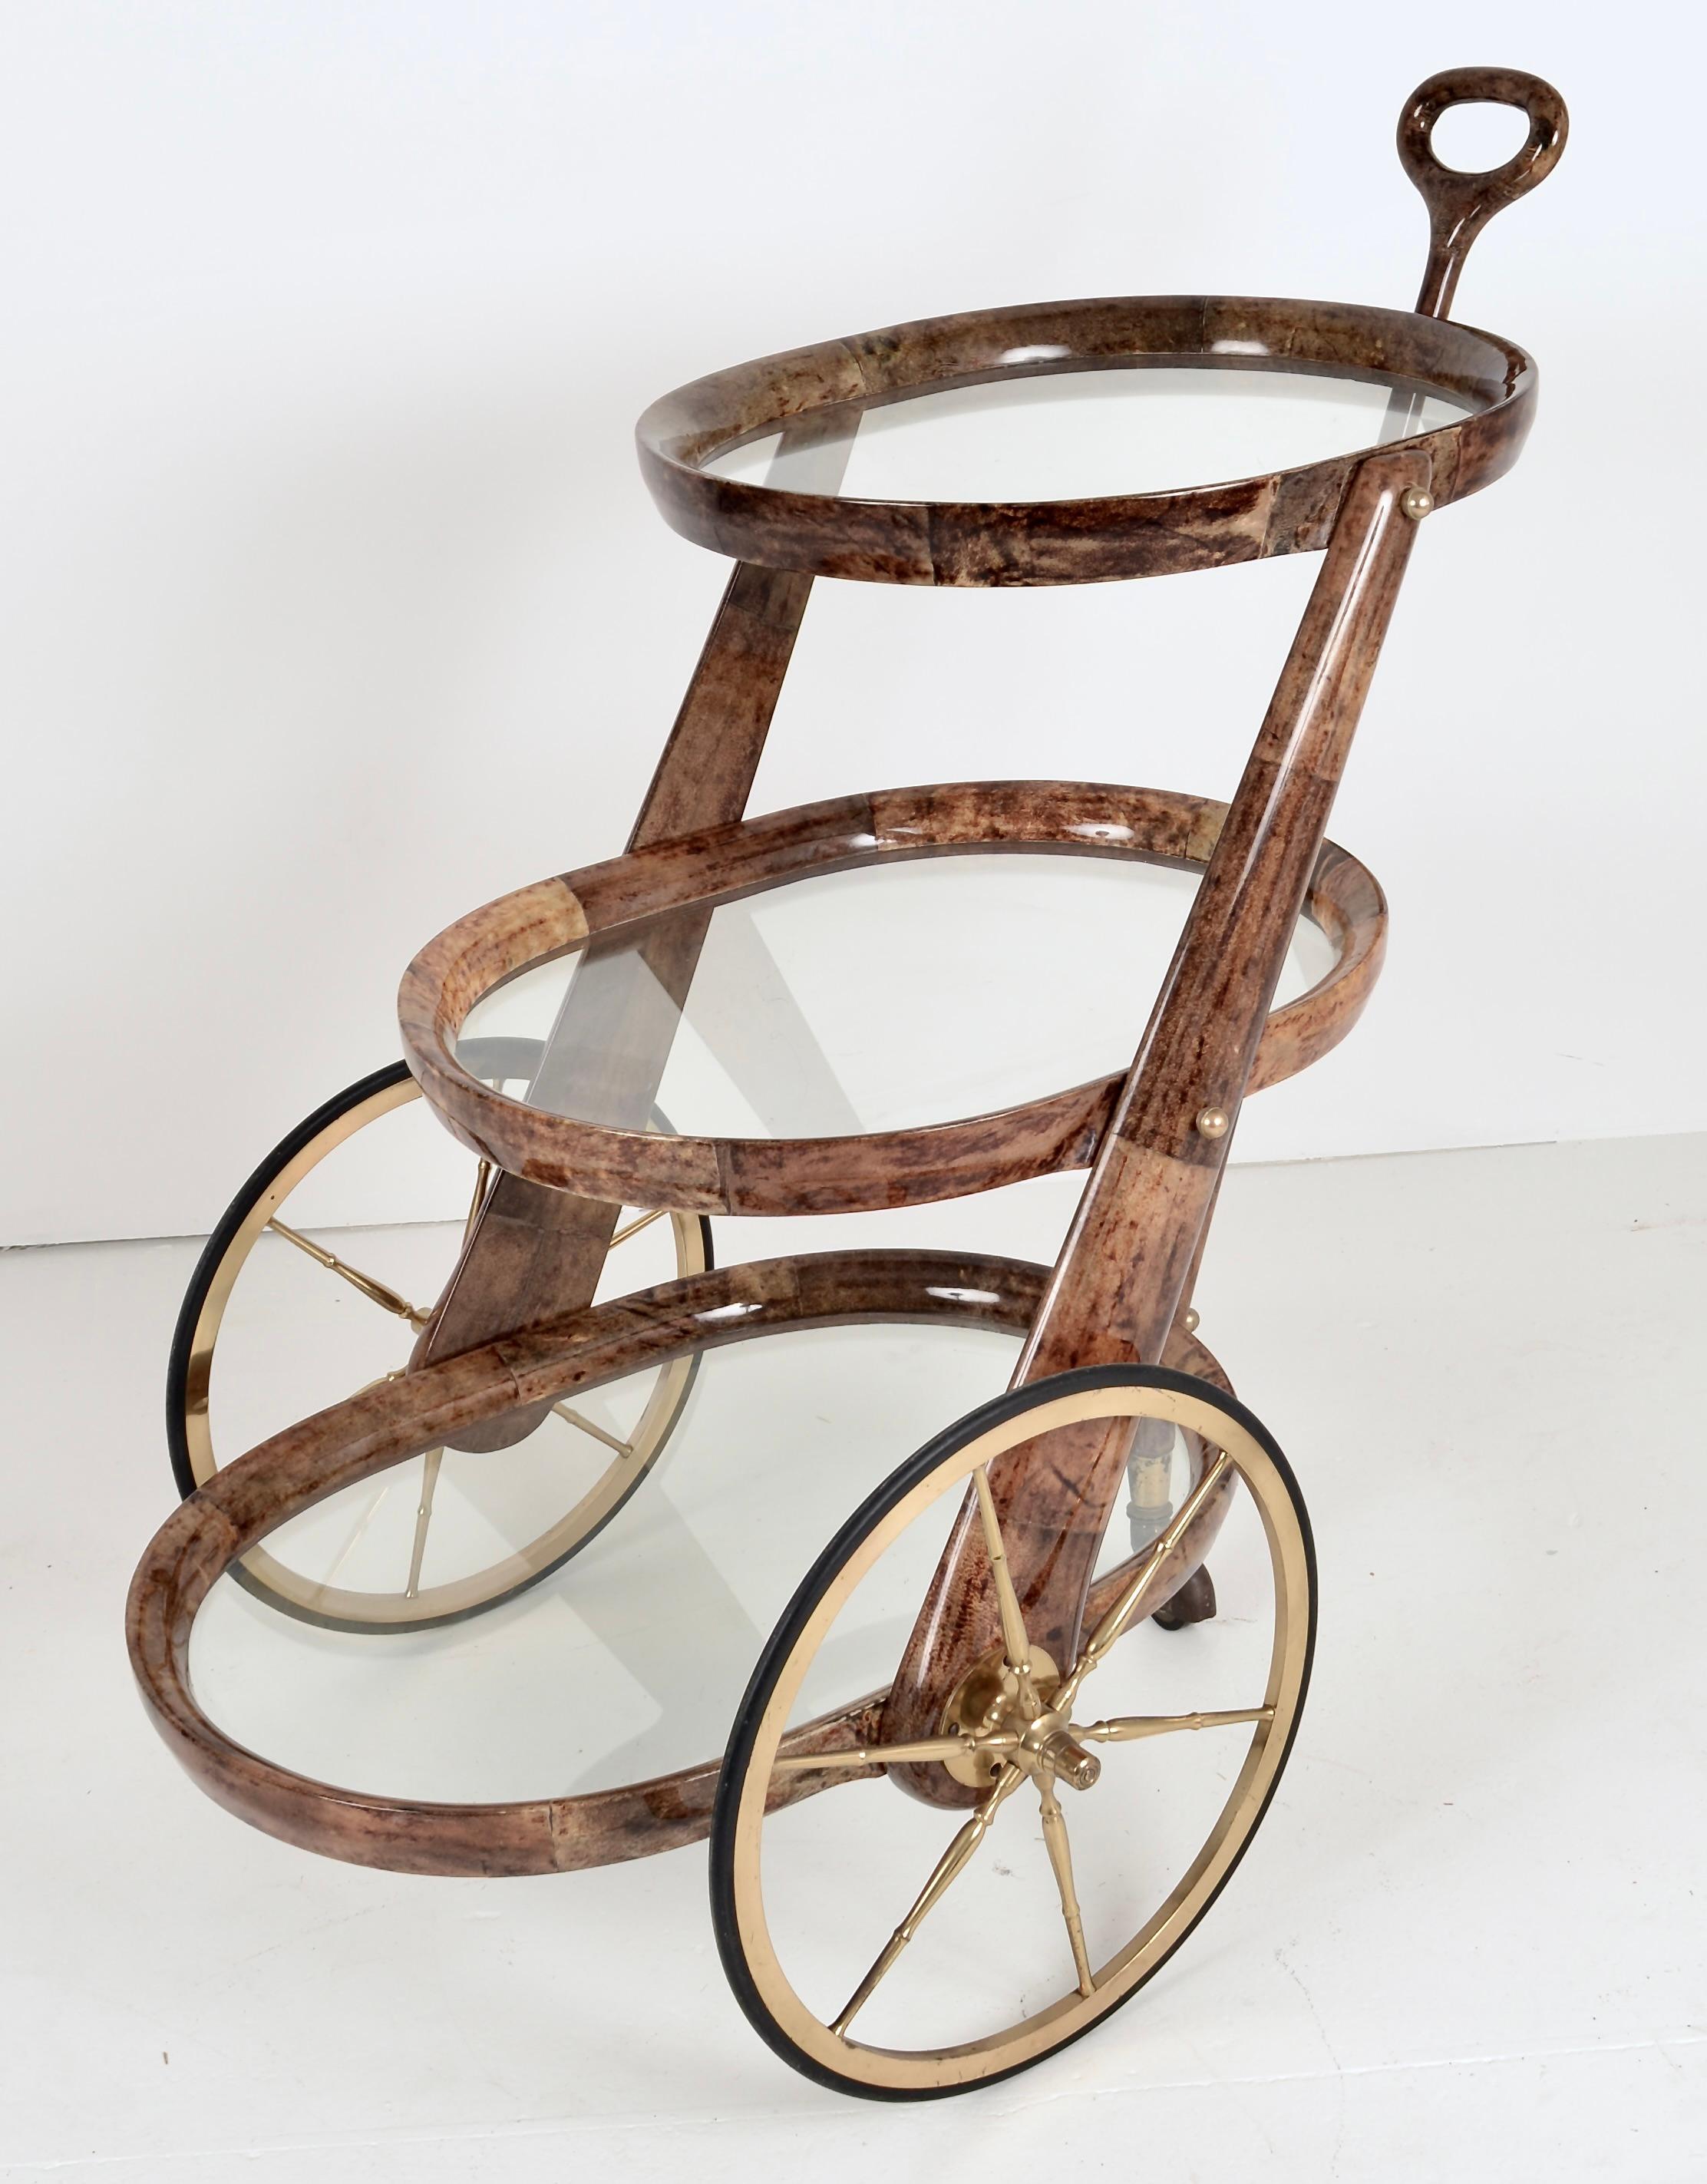 Aldo Tura Three-Tier Lacquered Goatskin Bar Cart, Italy 1980s In Good Condition For Sale In Norwalk, CT